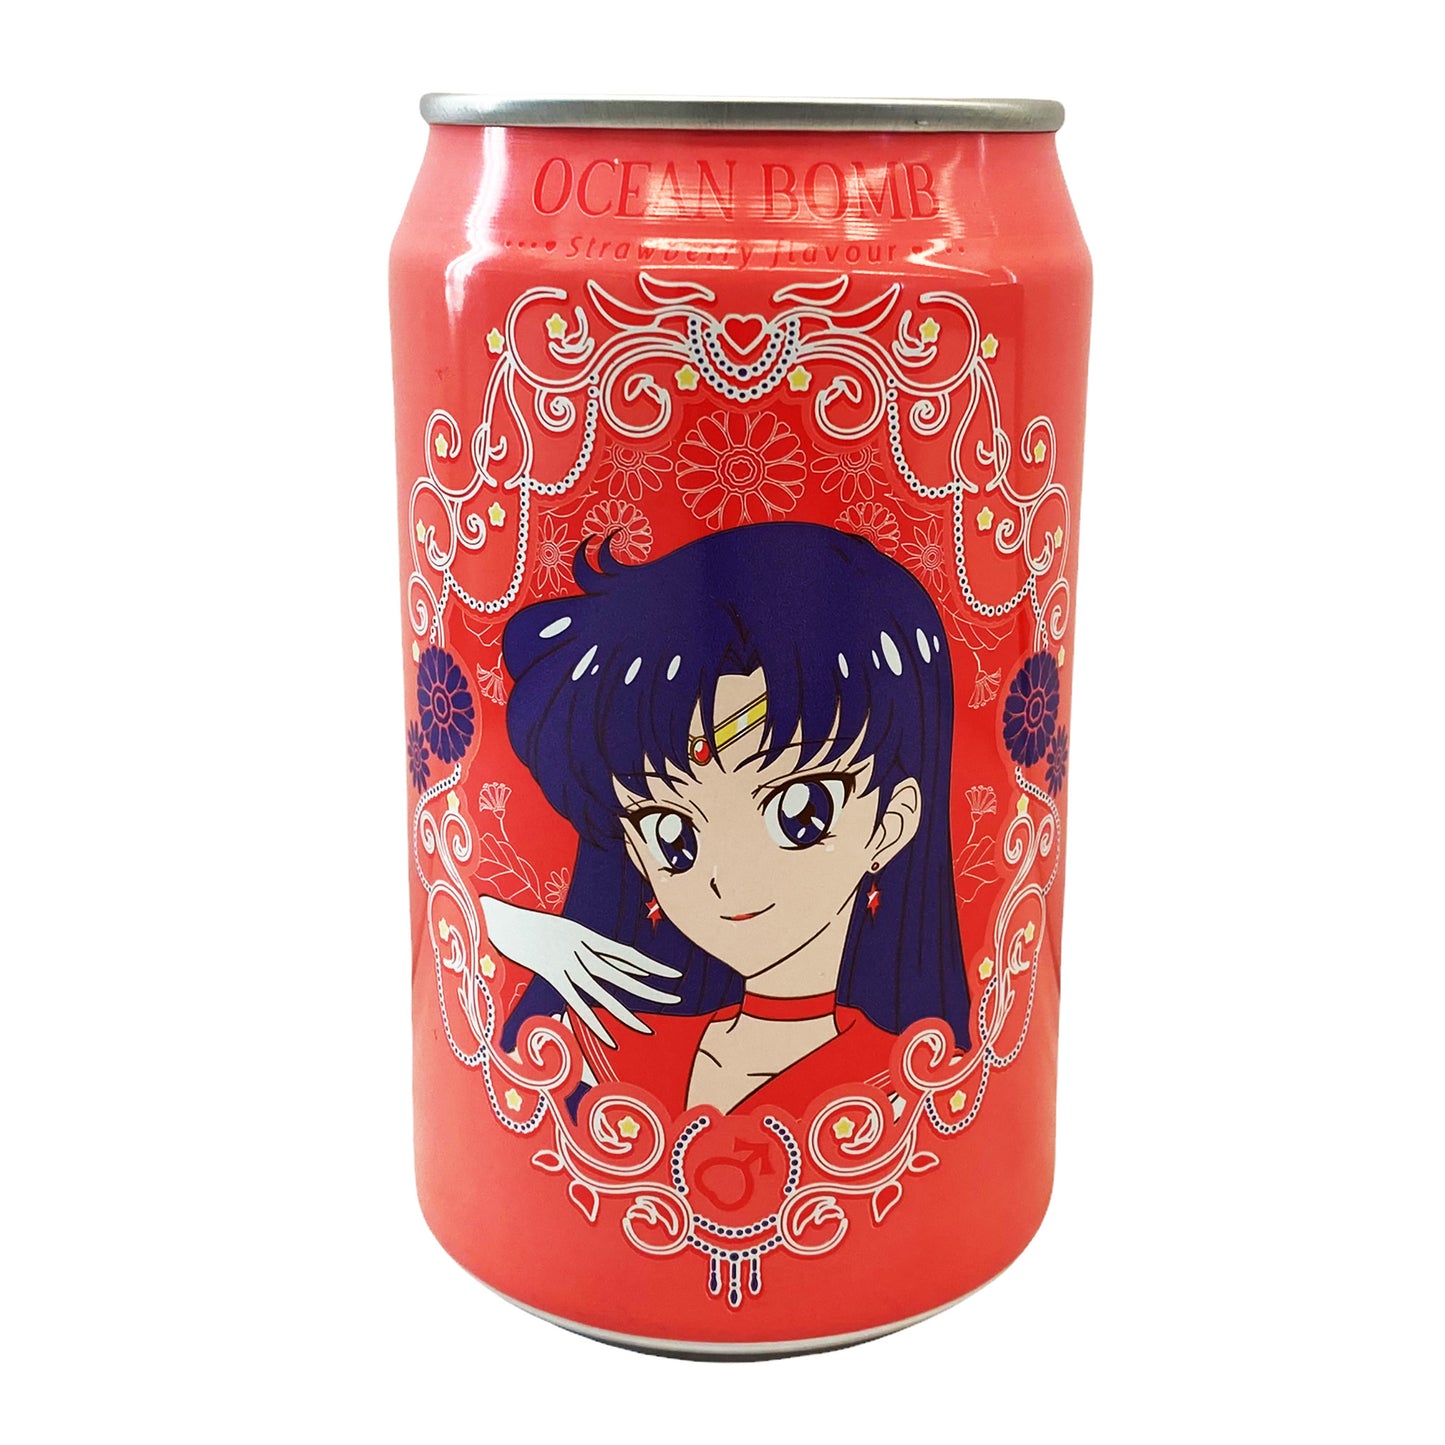 Front graphic image of Ocean Bomb Sailor Moon Sparkling Water - Strawberry Flavor 11.15oz (330ml)